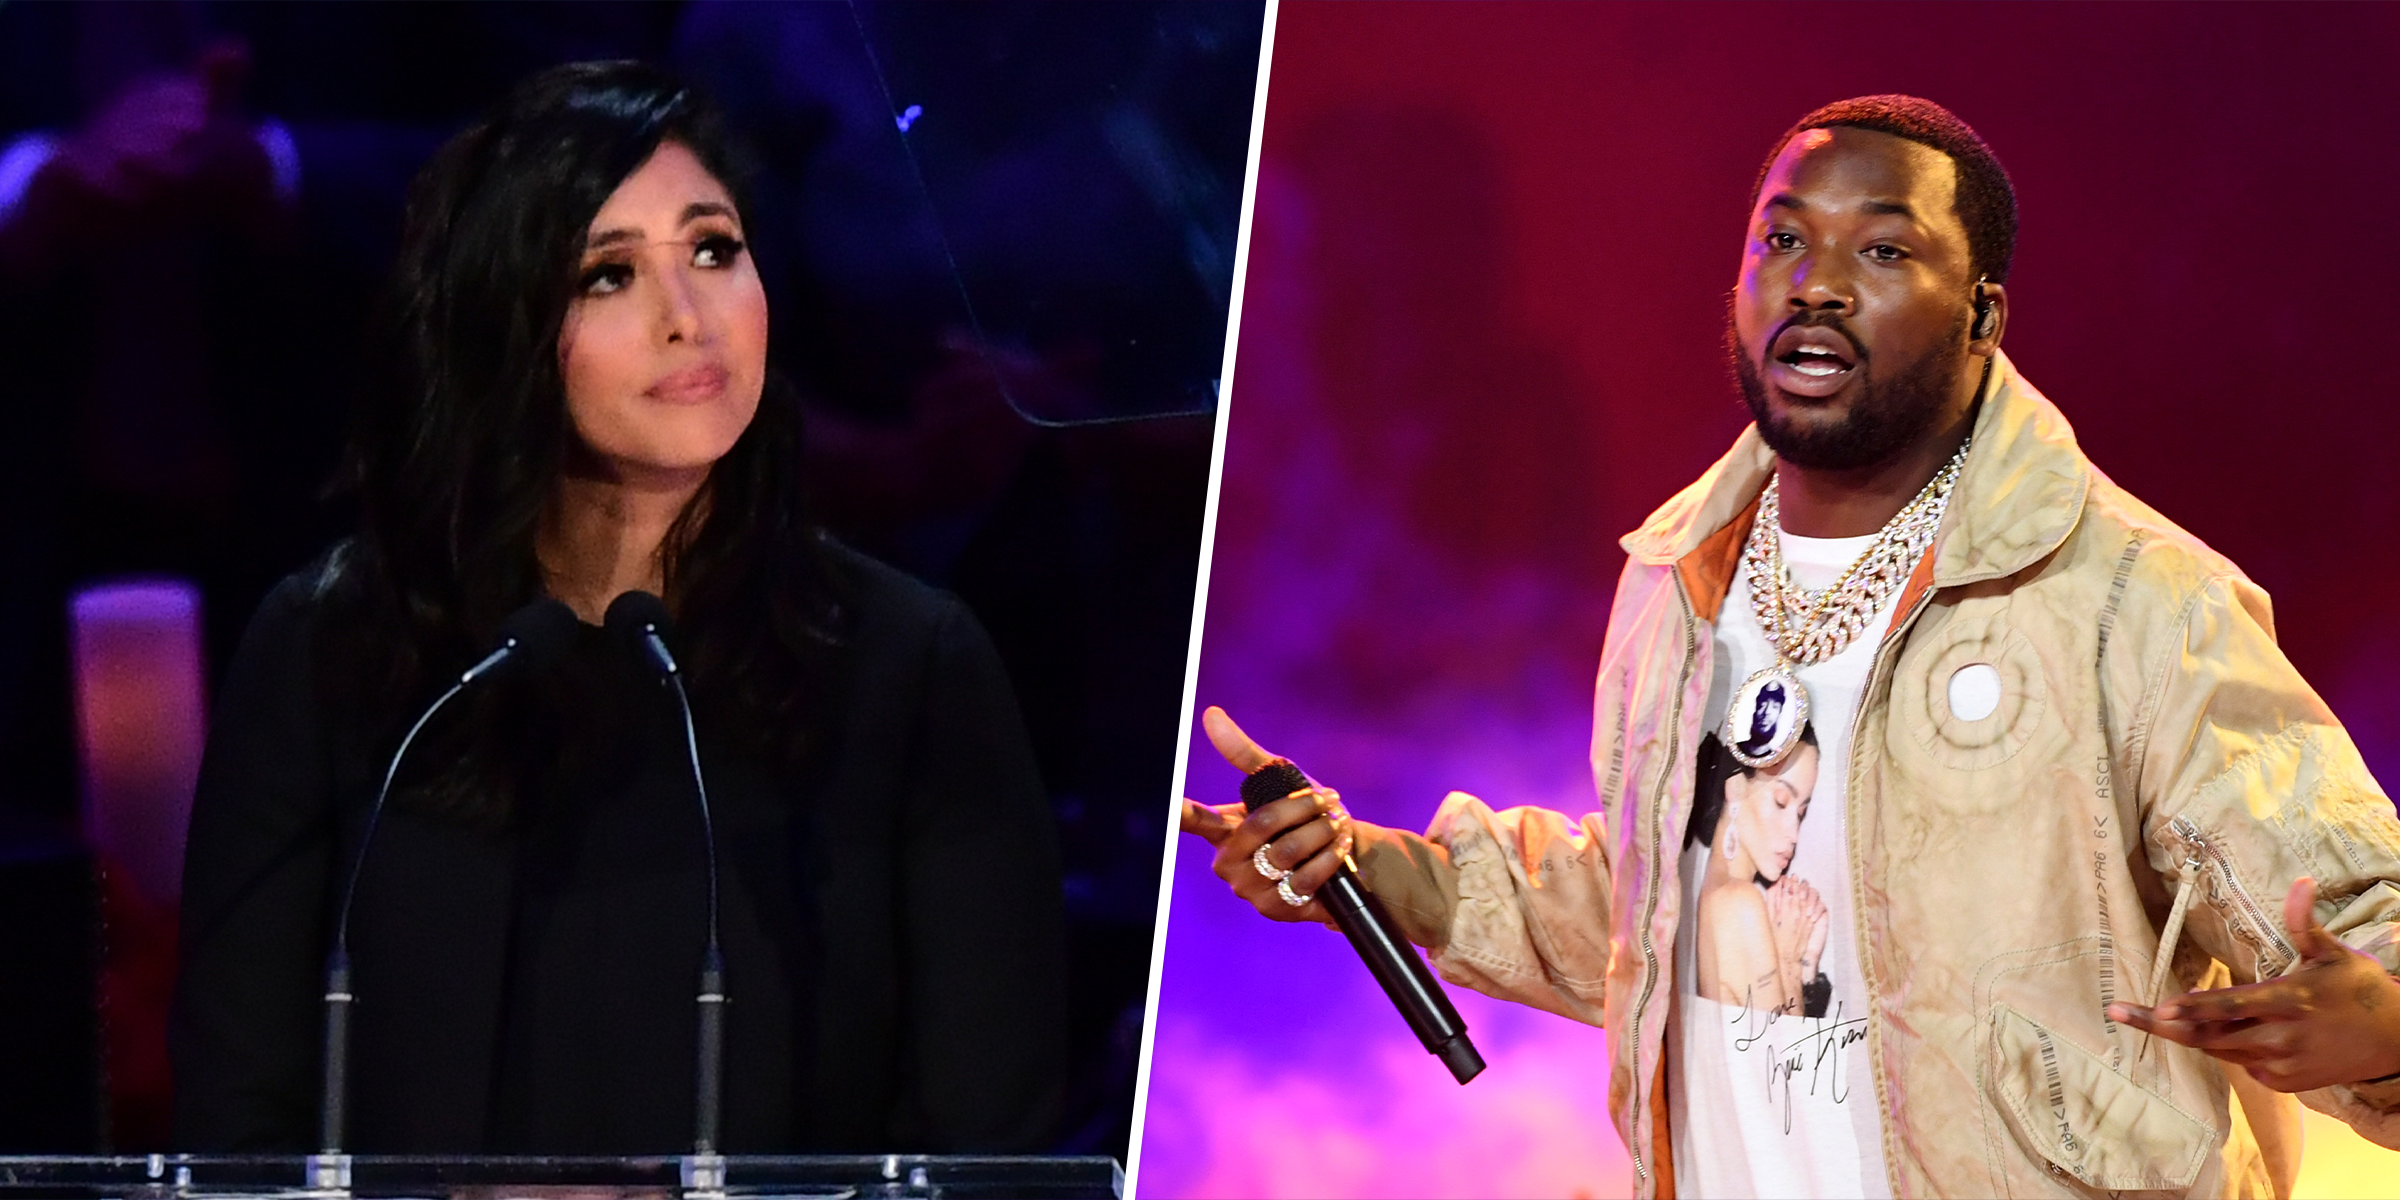 Vanessa Bryant called out rapper Meek Mill for a reference to Kobe Bryant.